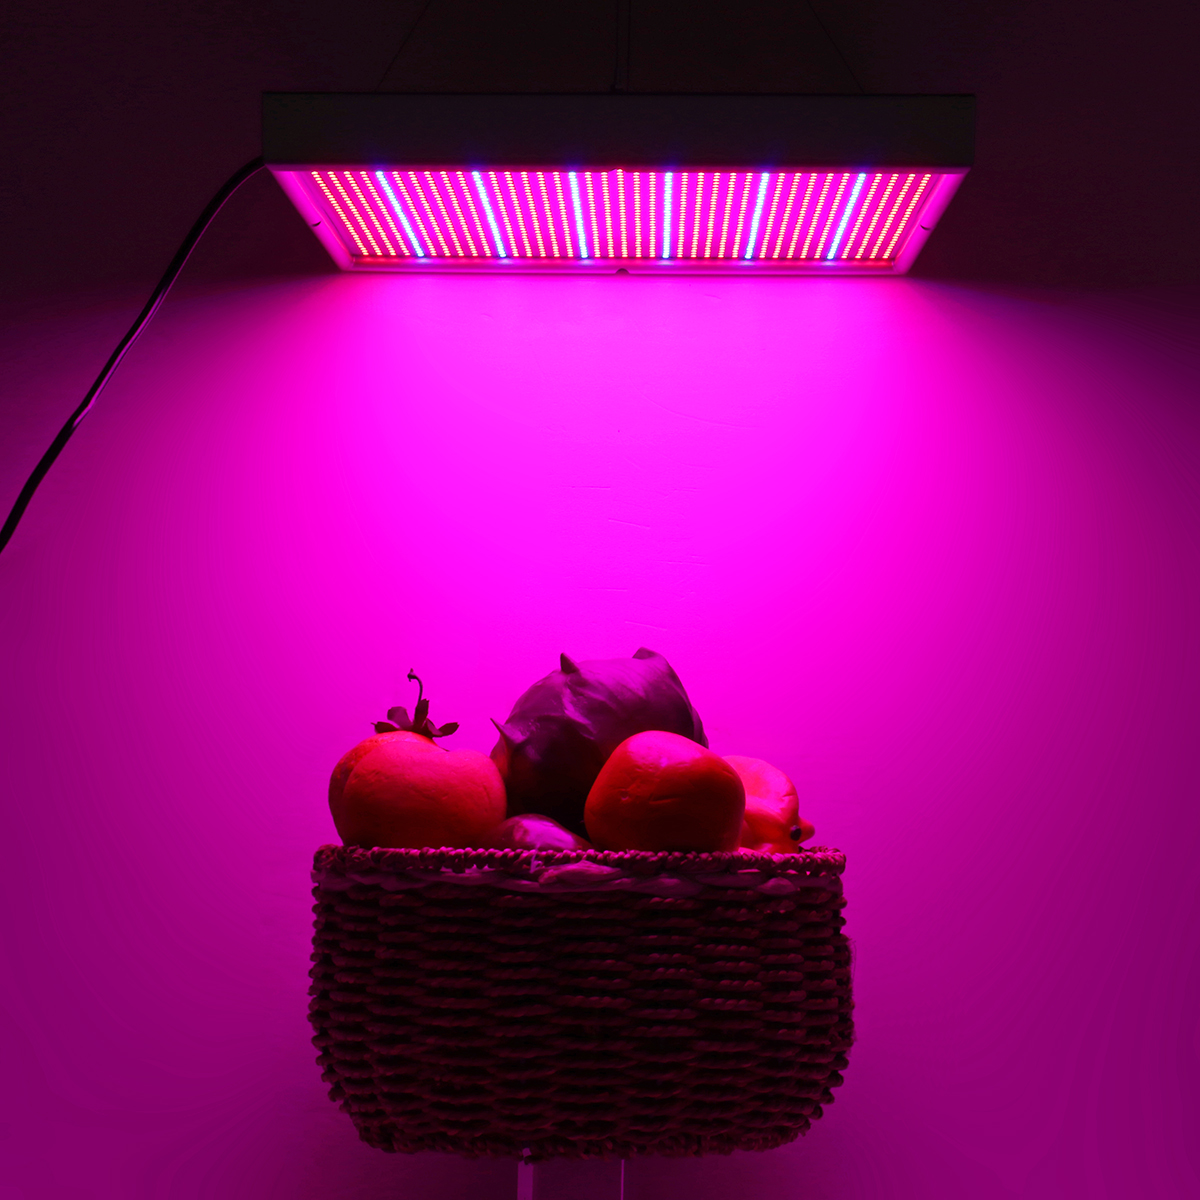 1365-LED-Plant-Lights-Square-Hanging-Wire-Plant-Growth-Lights-Greenhouse-Vegetable-Lamp-for-Gowing-P-1675545-2